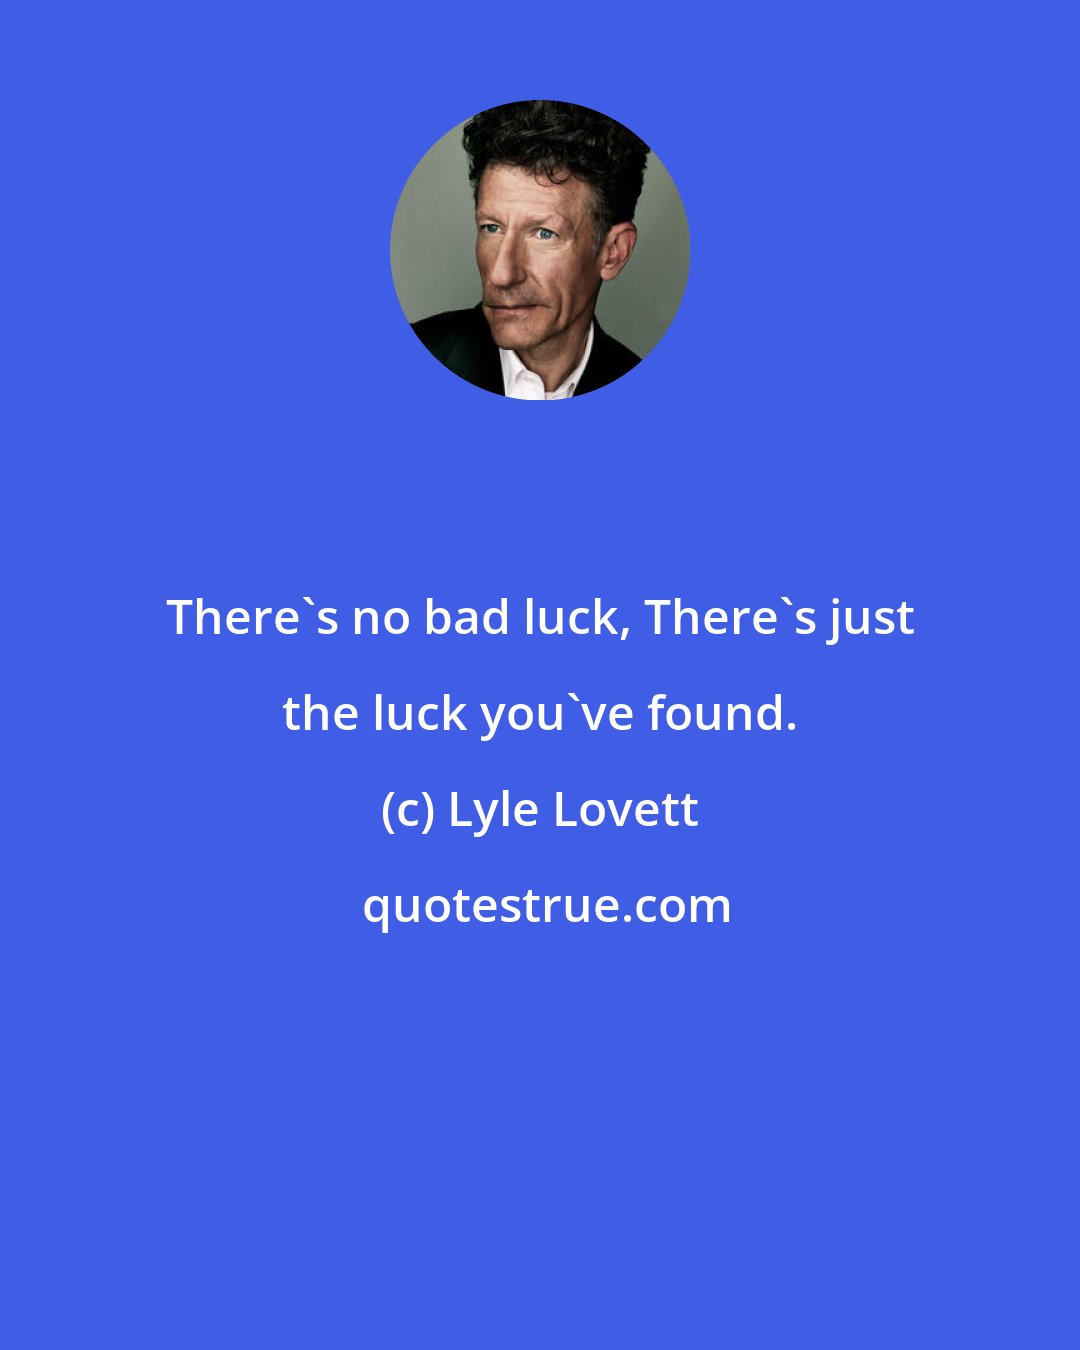 Lyle Lovett: There's no bad luck, There's just the luck you've found.